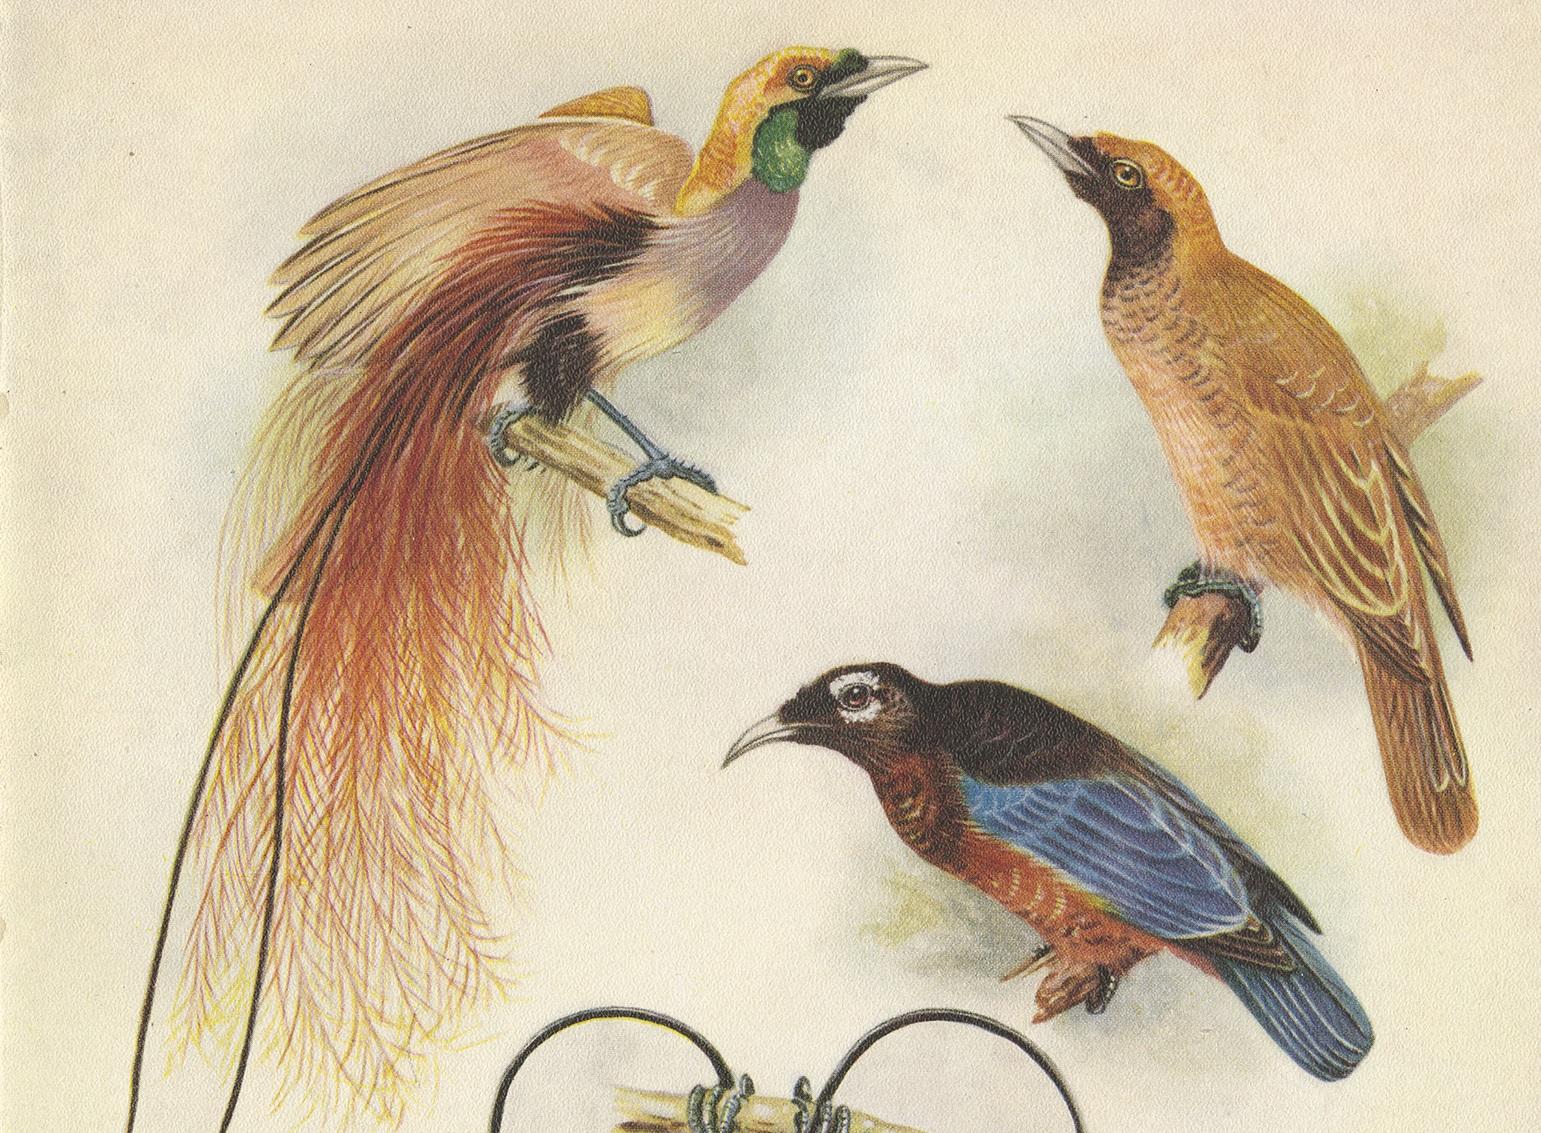 Decorative print illustrating Goldie's Bird of Paradise and the blue Bird of Paradise. This authentic print originates from 'Birds of Paradise and Bower Birds' by Tom Iredale. With colored illustrations of every species by Lilian Medland. Published